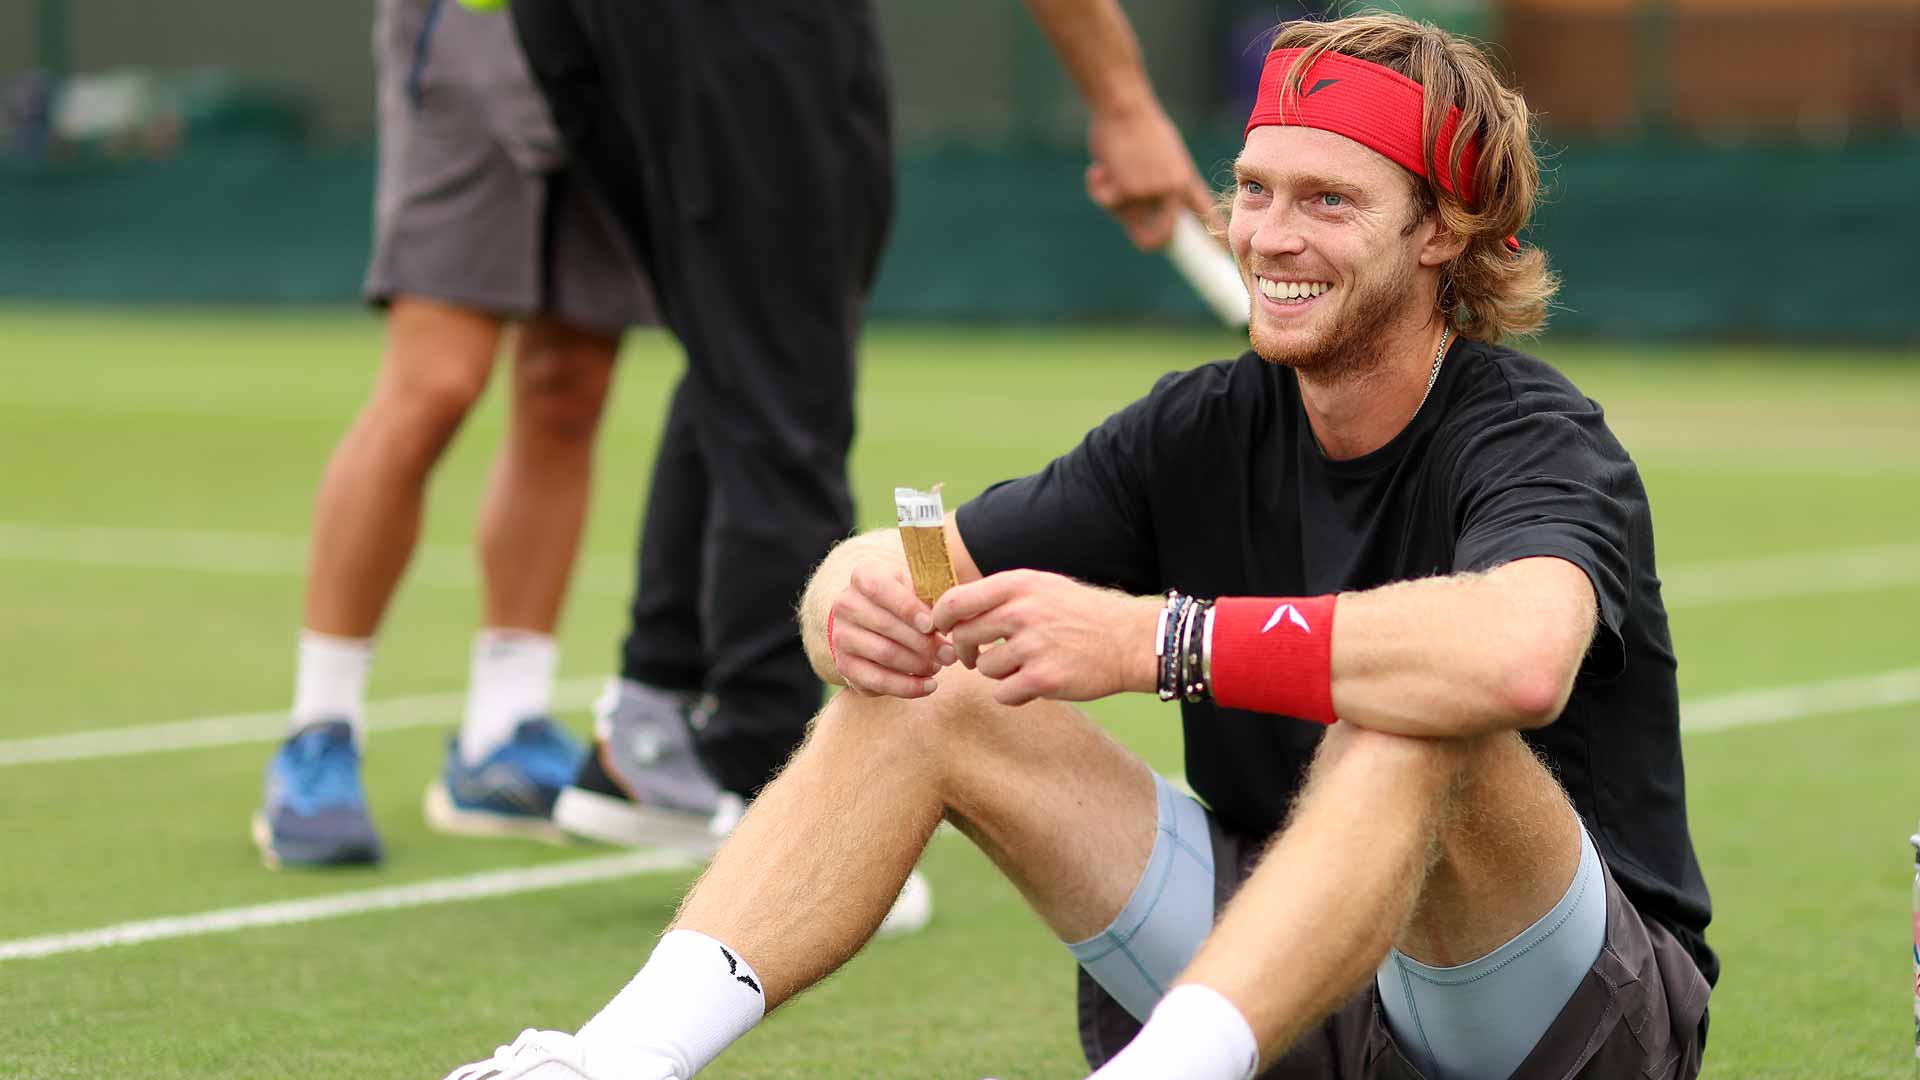 <a href='https://www.atptour.com/en/players/andrey-rublev/re44/overview'>Andrey Rublev</a> enjoys a break during practice on Tuesday at <a href='https://www.atptour.com/en/tournaments/wimbledon/540/overview'>Wimbledon</a>.